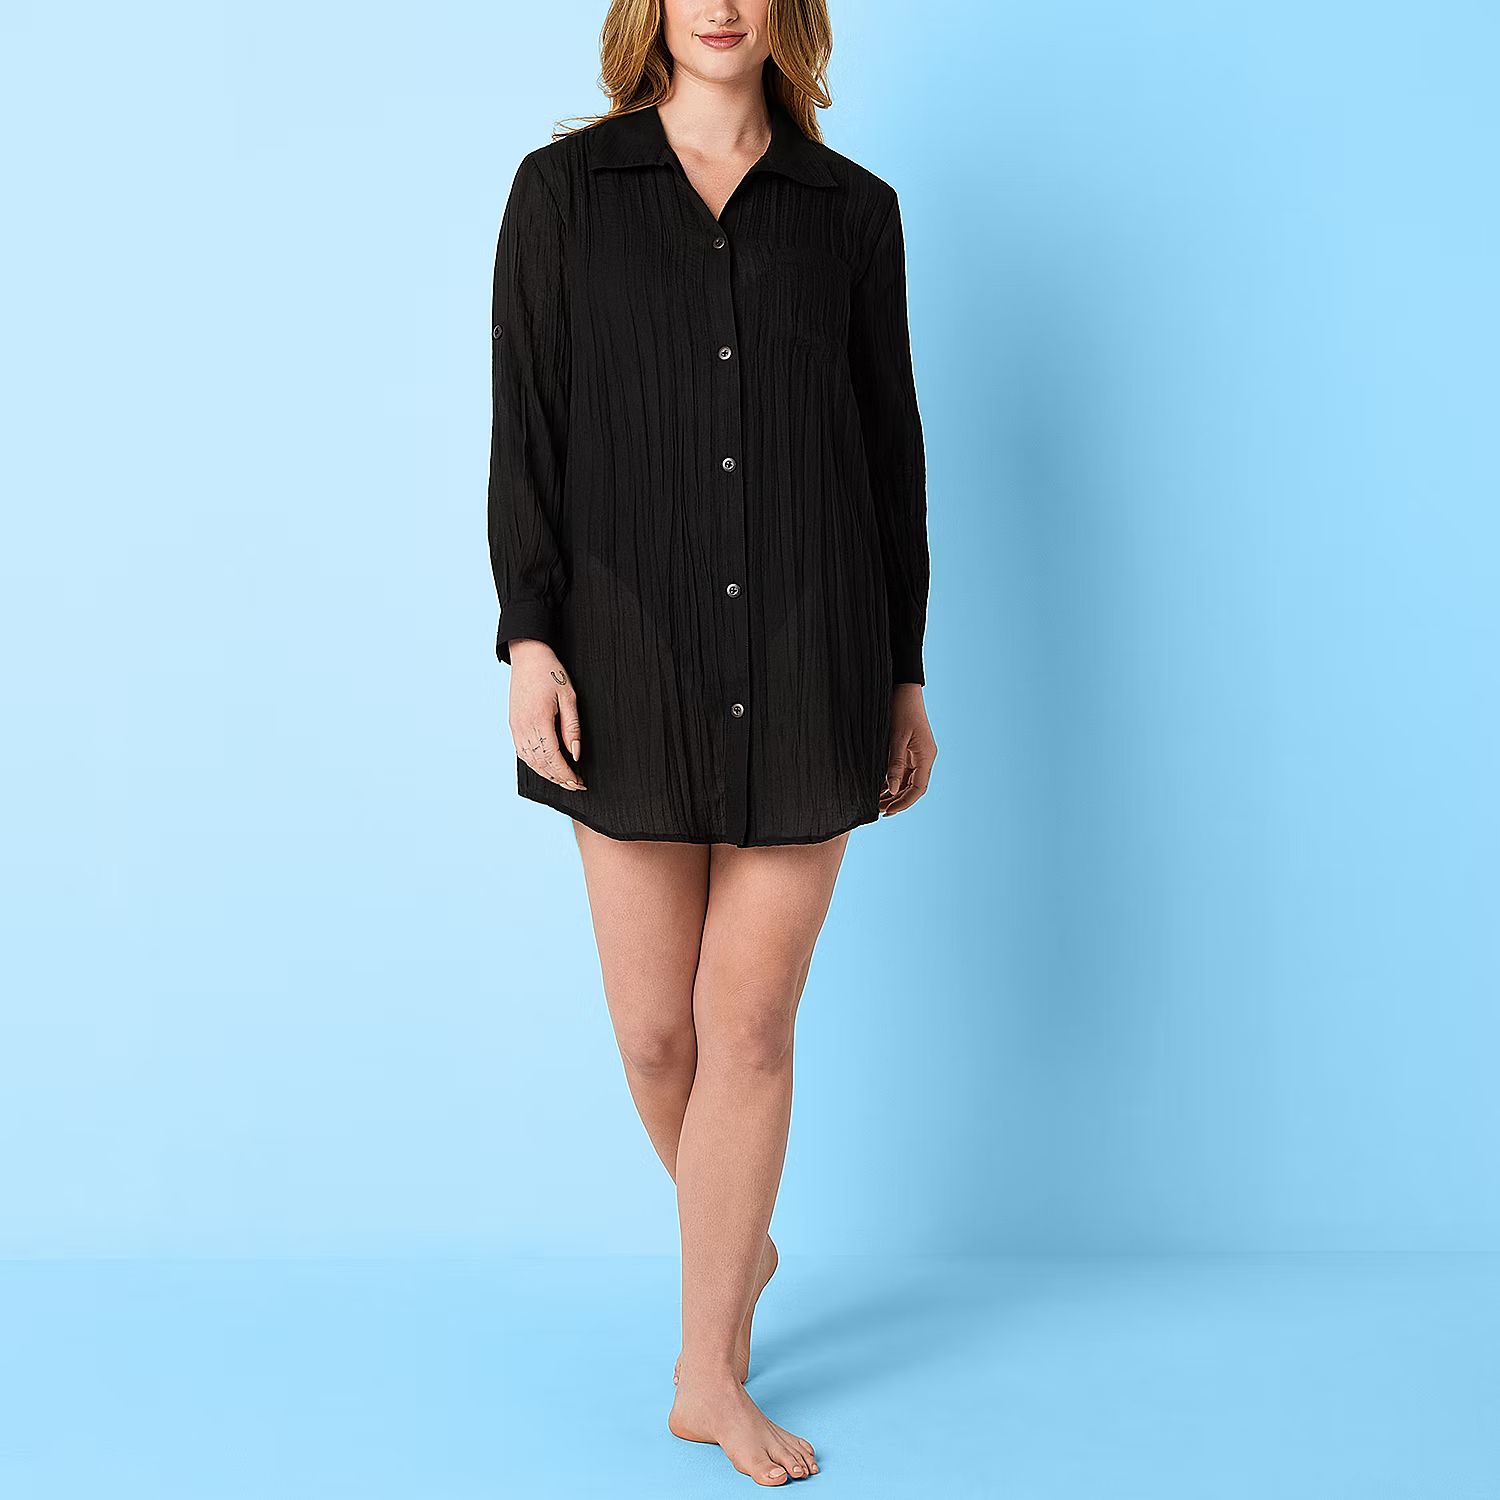 Mynah Dress Swimsuit Cover-Up | JCPenney